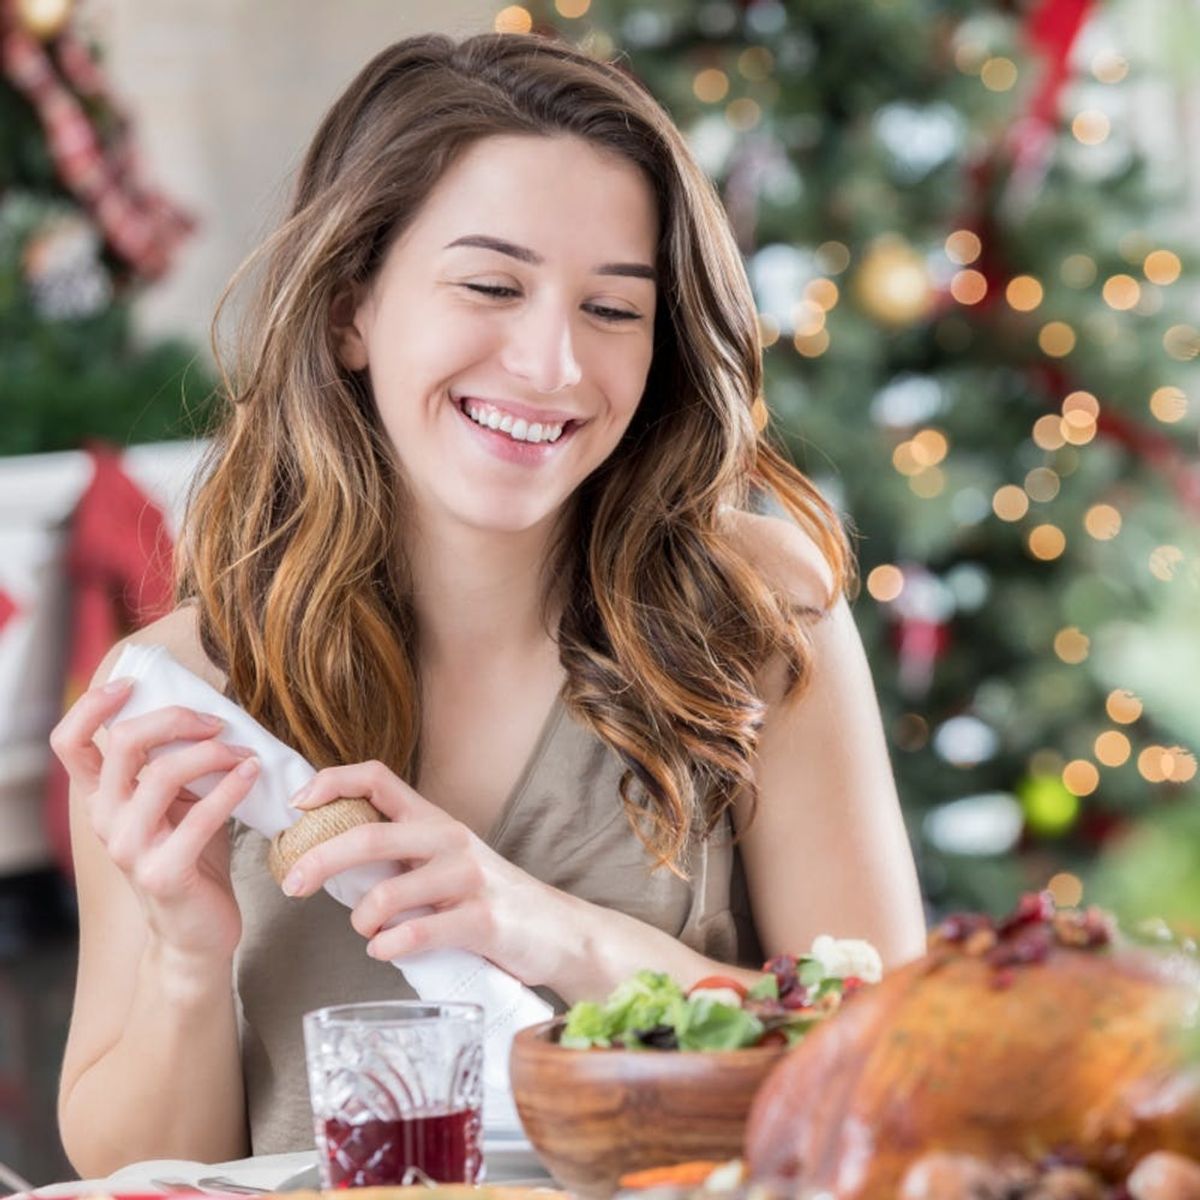 How to Support a Friend With an Eating Disorder During the Holidays